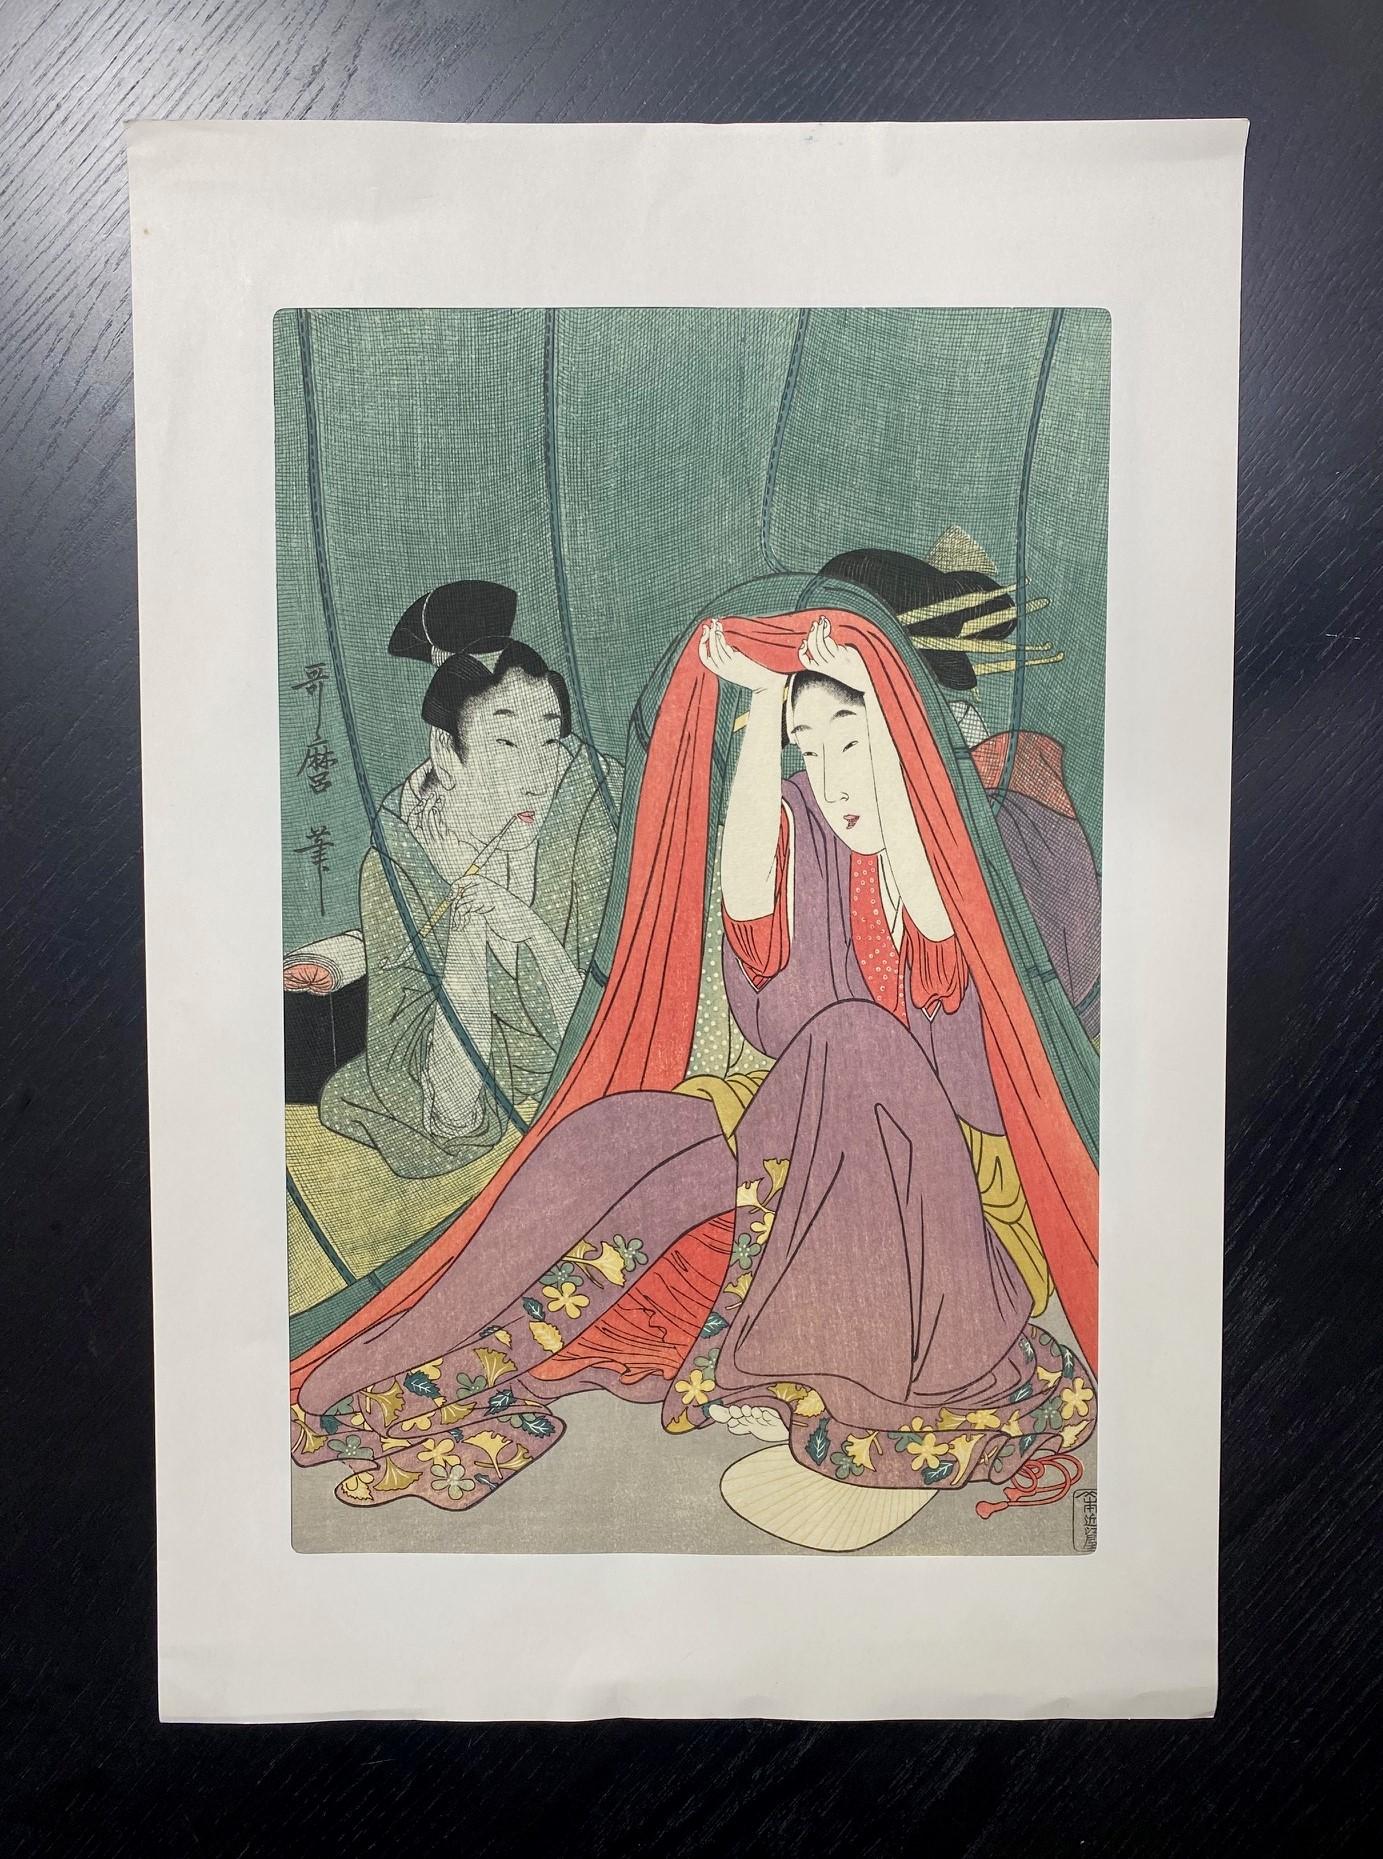 A beautifully composed and subtly colored Japanese woodblock print featuring two women, likely Geishas, enjoying an opium pipe inder a green netting.  This work is by Kitagawa Utamaro and is titled 